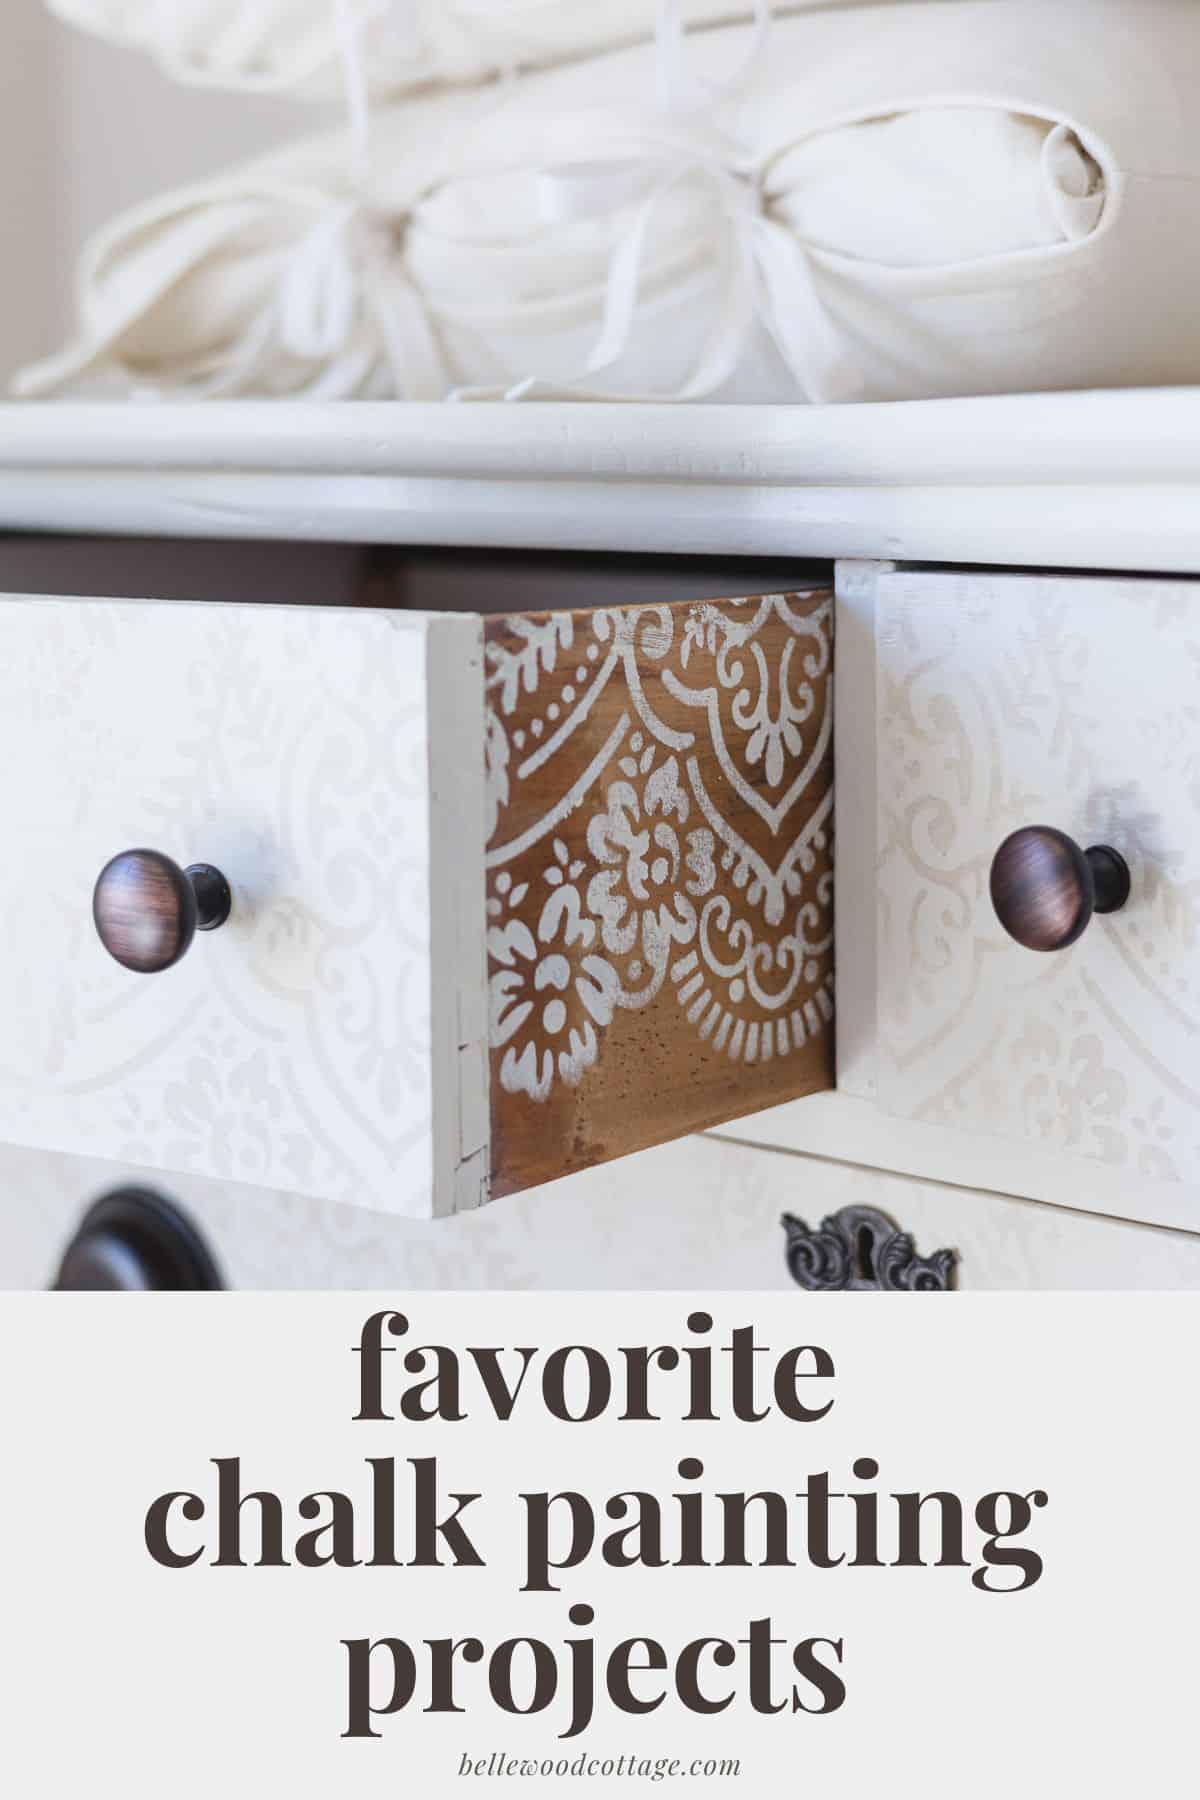 A dresser drawer pulled open to reveal white stenciling on the side with the words, "Favorite Chalk Painting Projects."